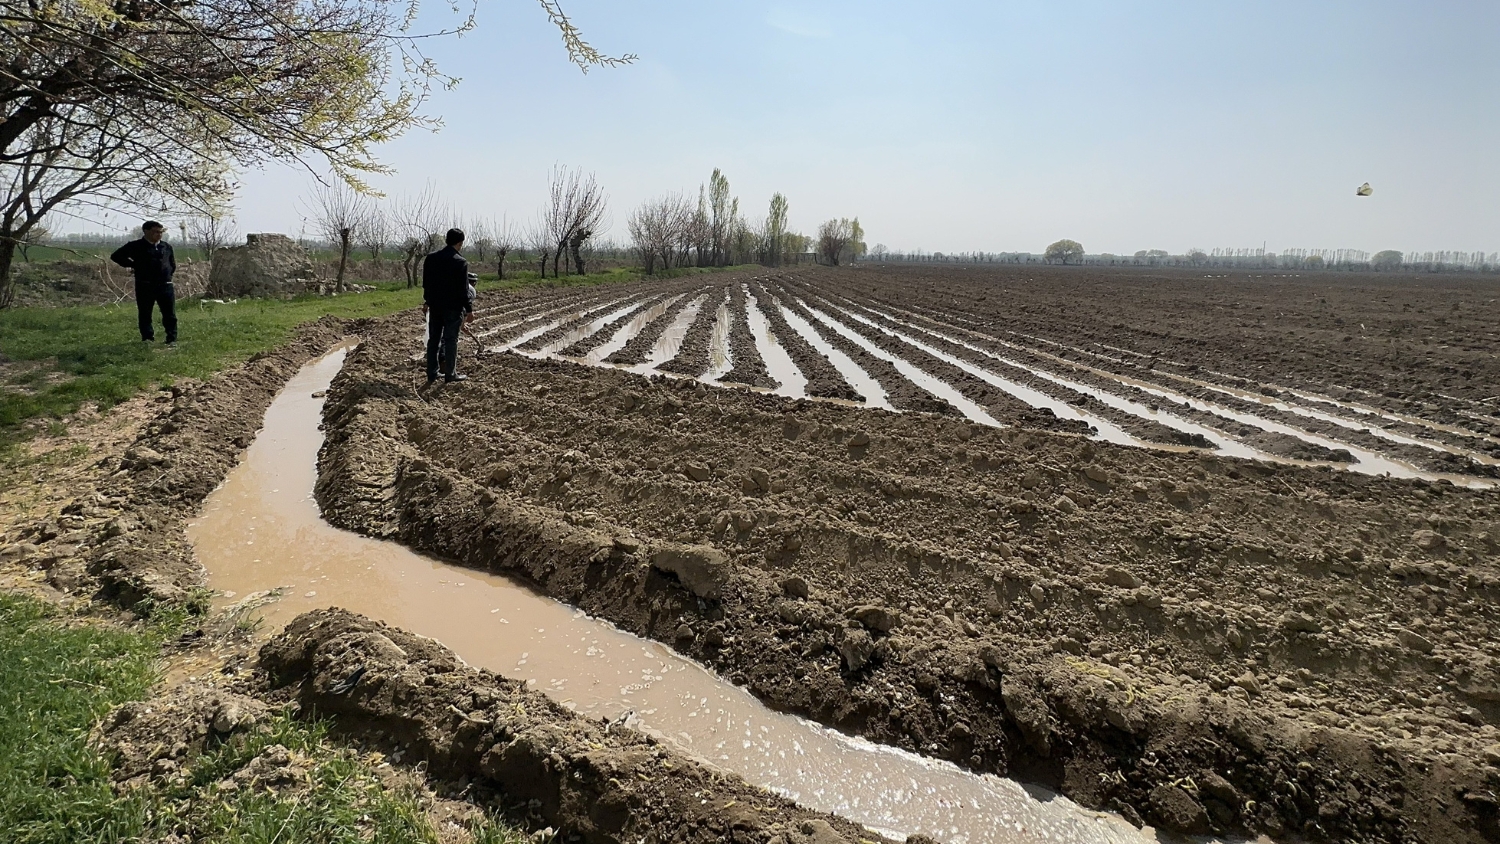 Irrigation ditches and canals route water to Uzbek fields.